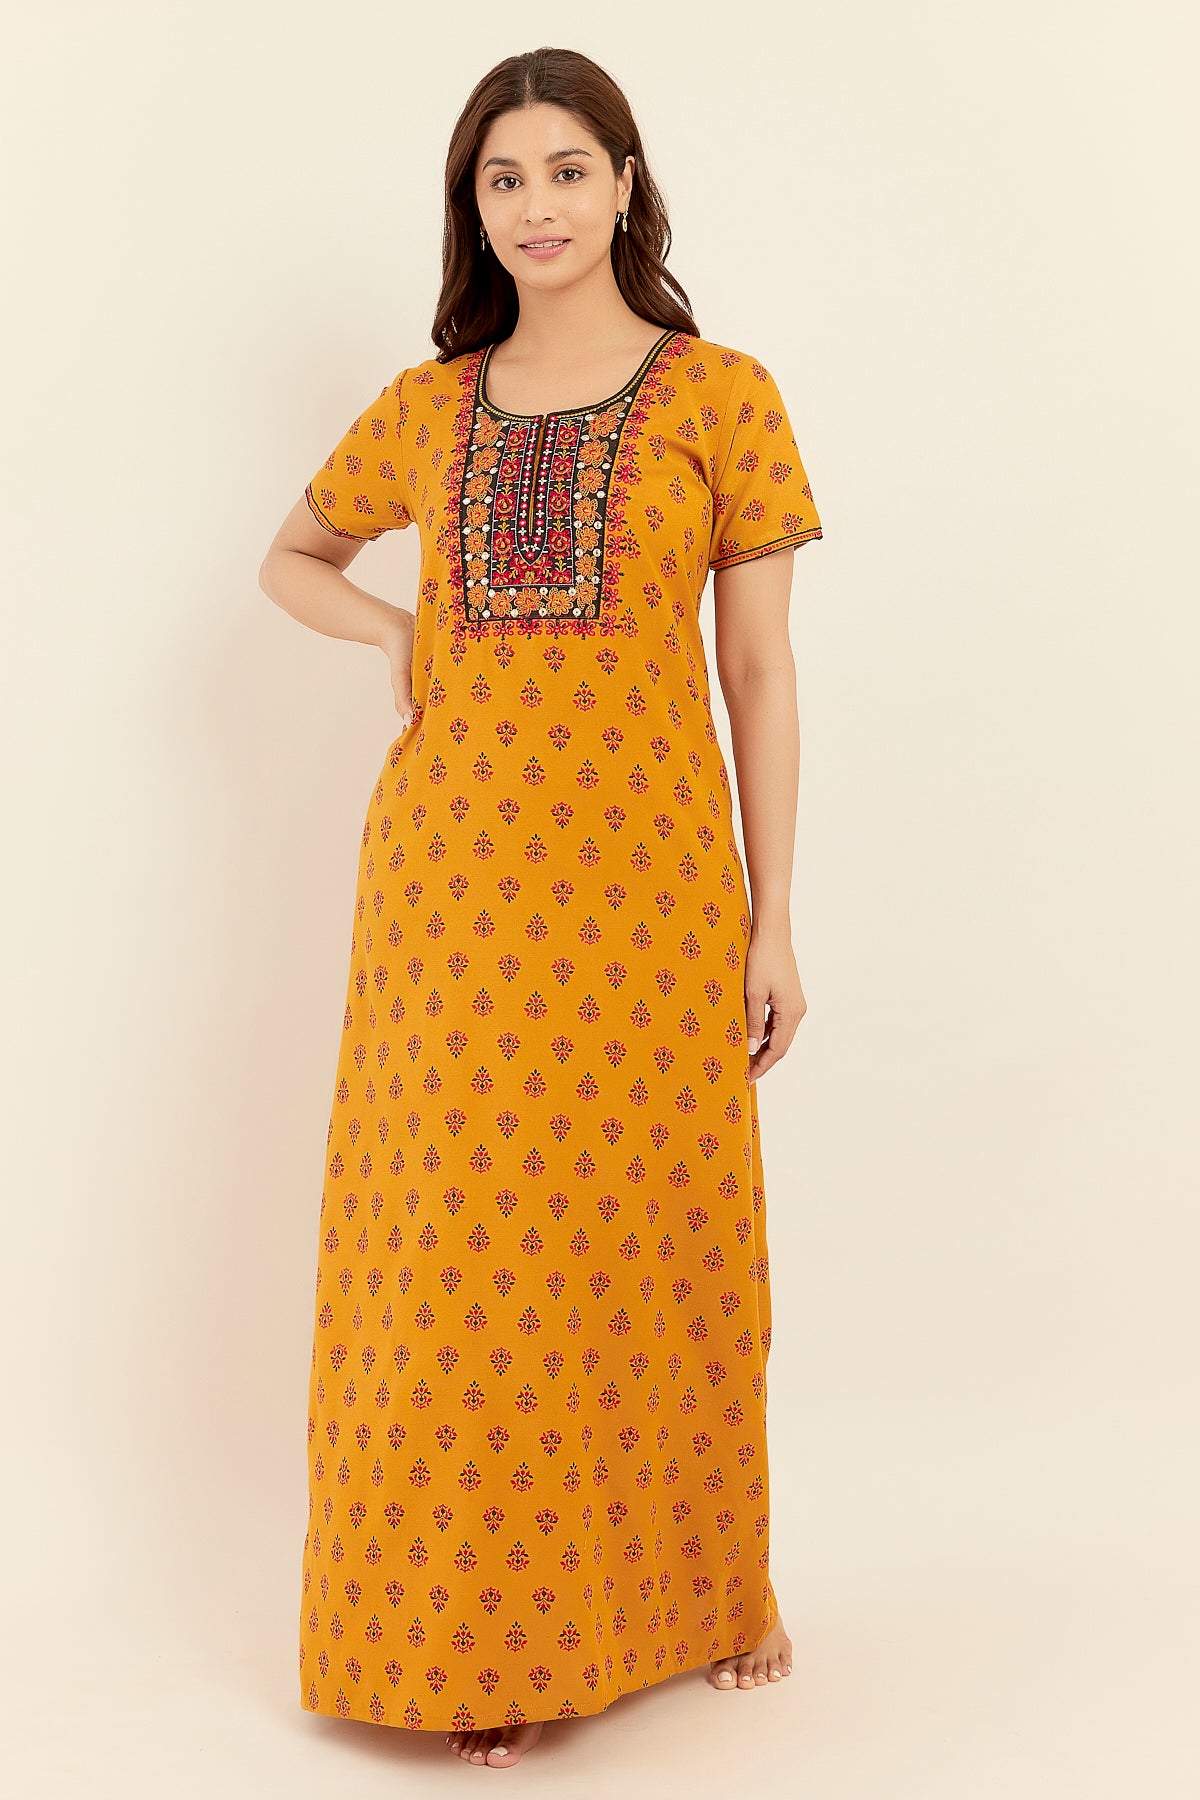 All Over Damask Print With Foil Mirror Embroidered Yoke Nighty - Mustard